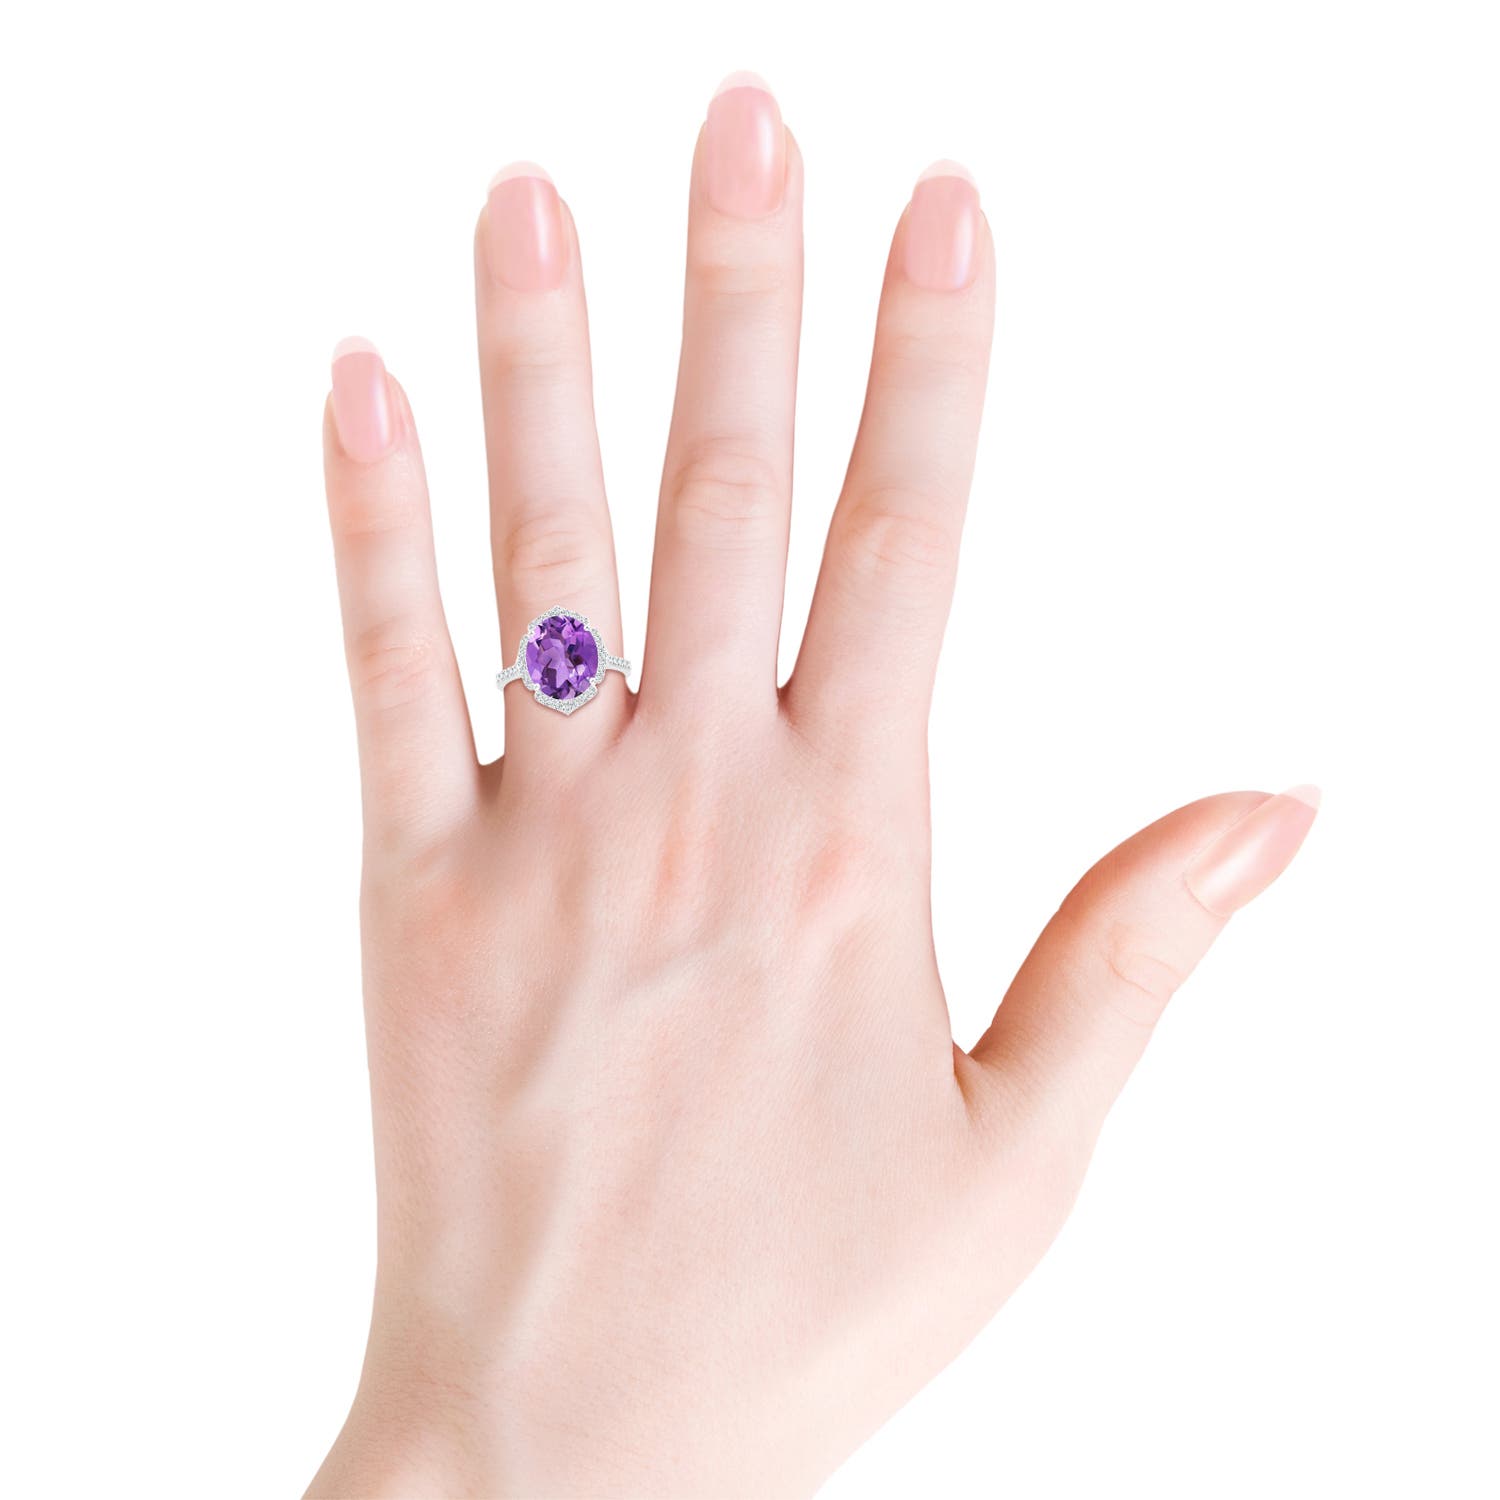 AA - Amethyst / 4.59 CT / 14 KT White Gold